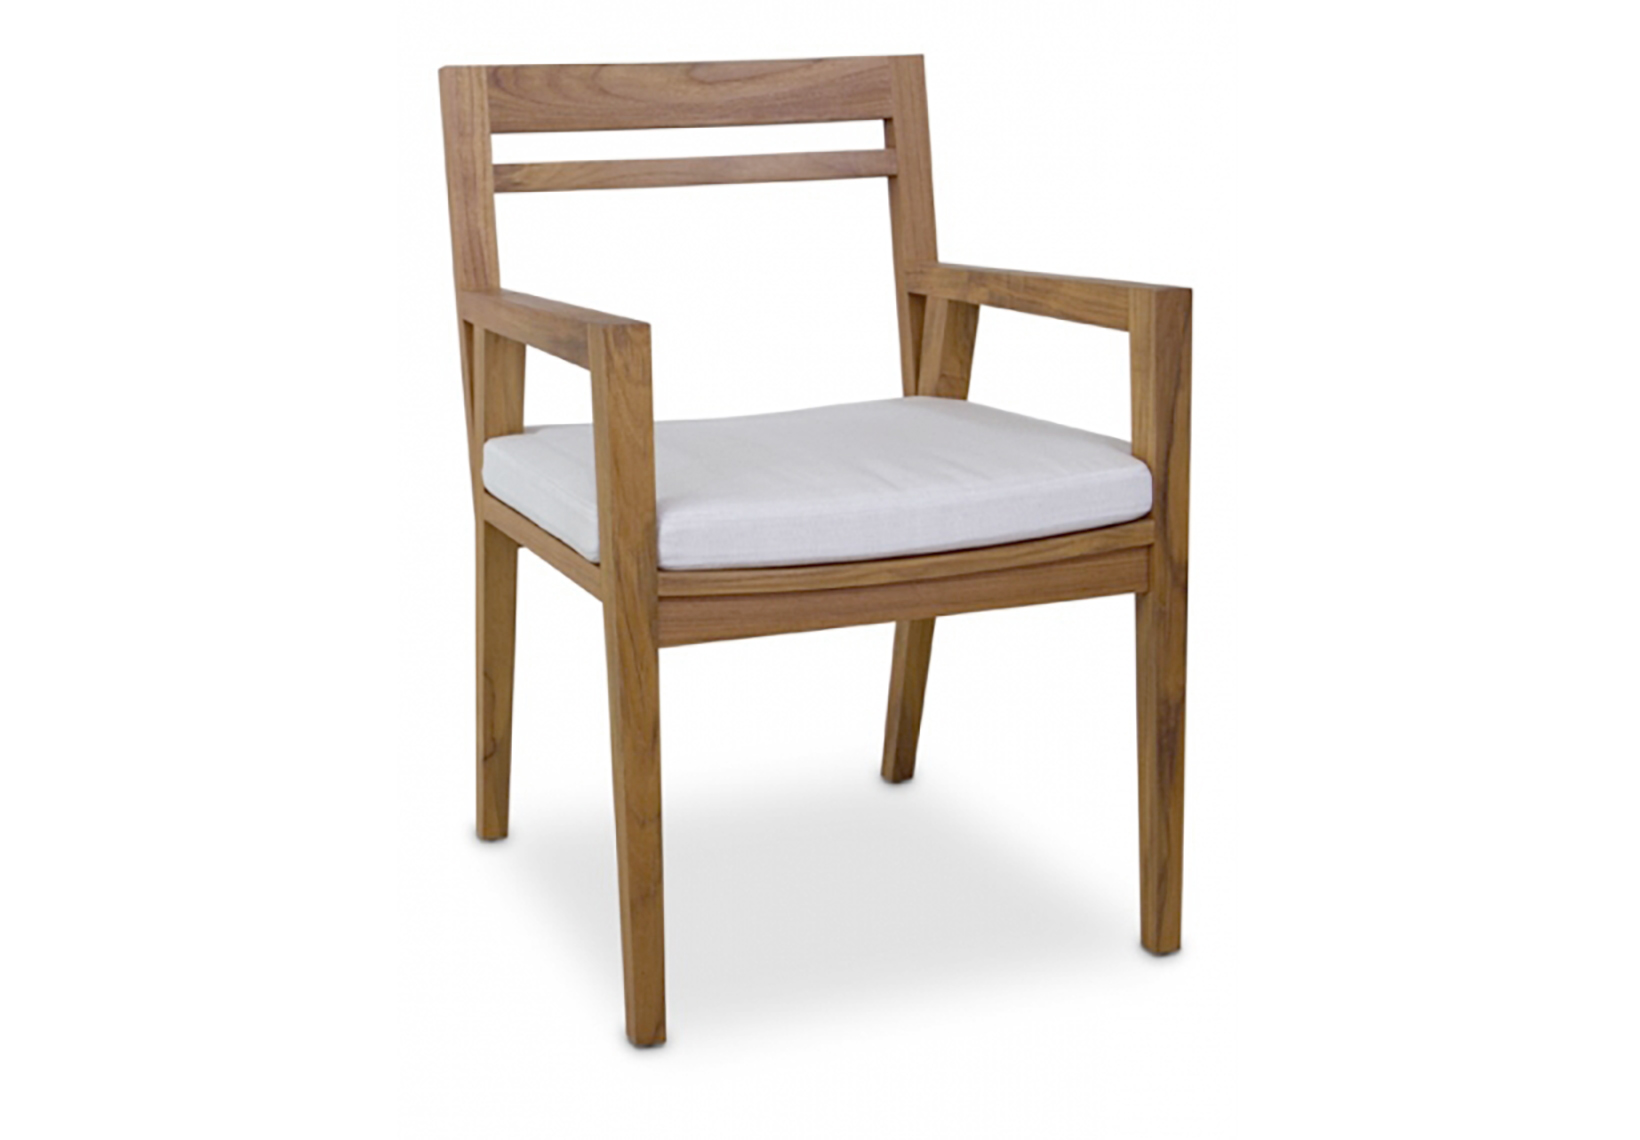 Neo Angulo Arm Chair Upholstered